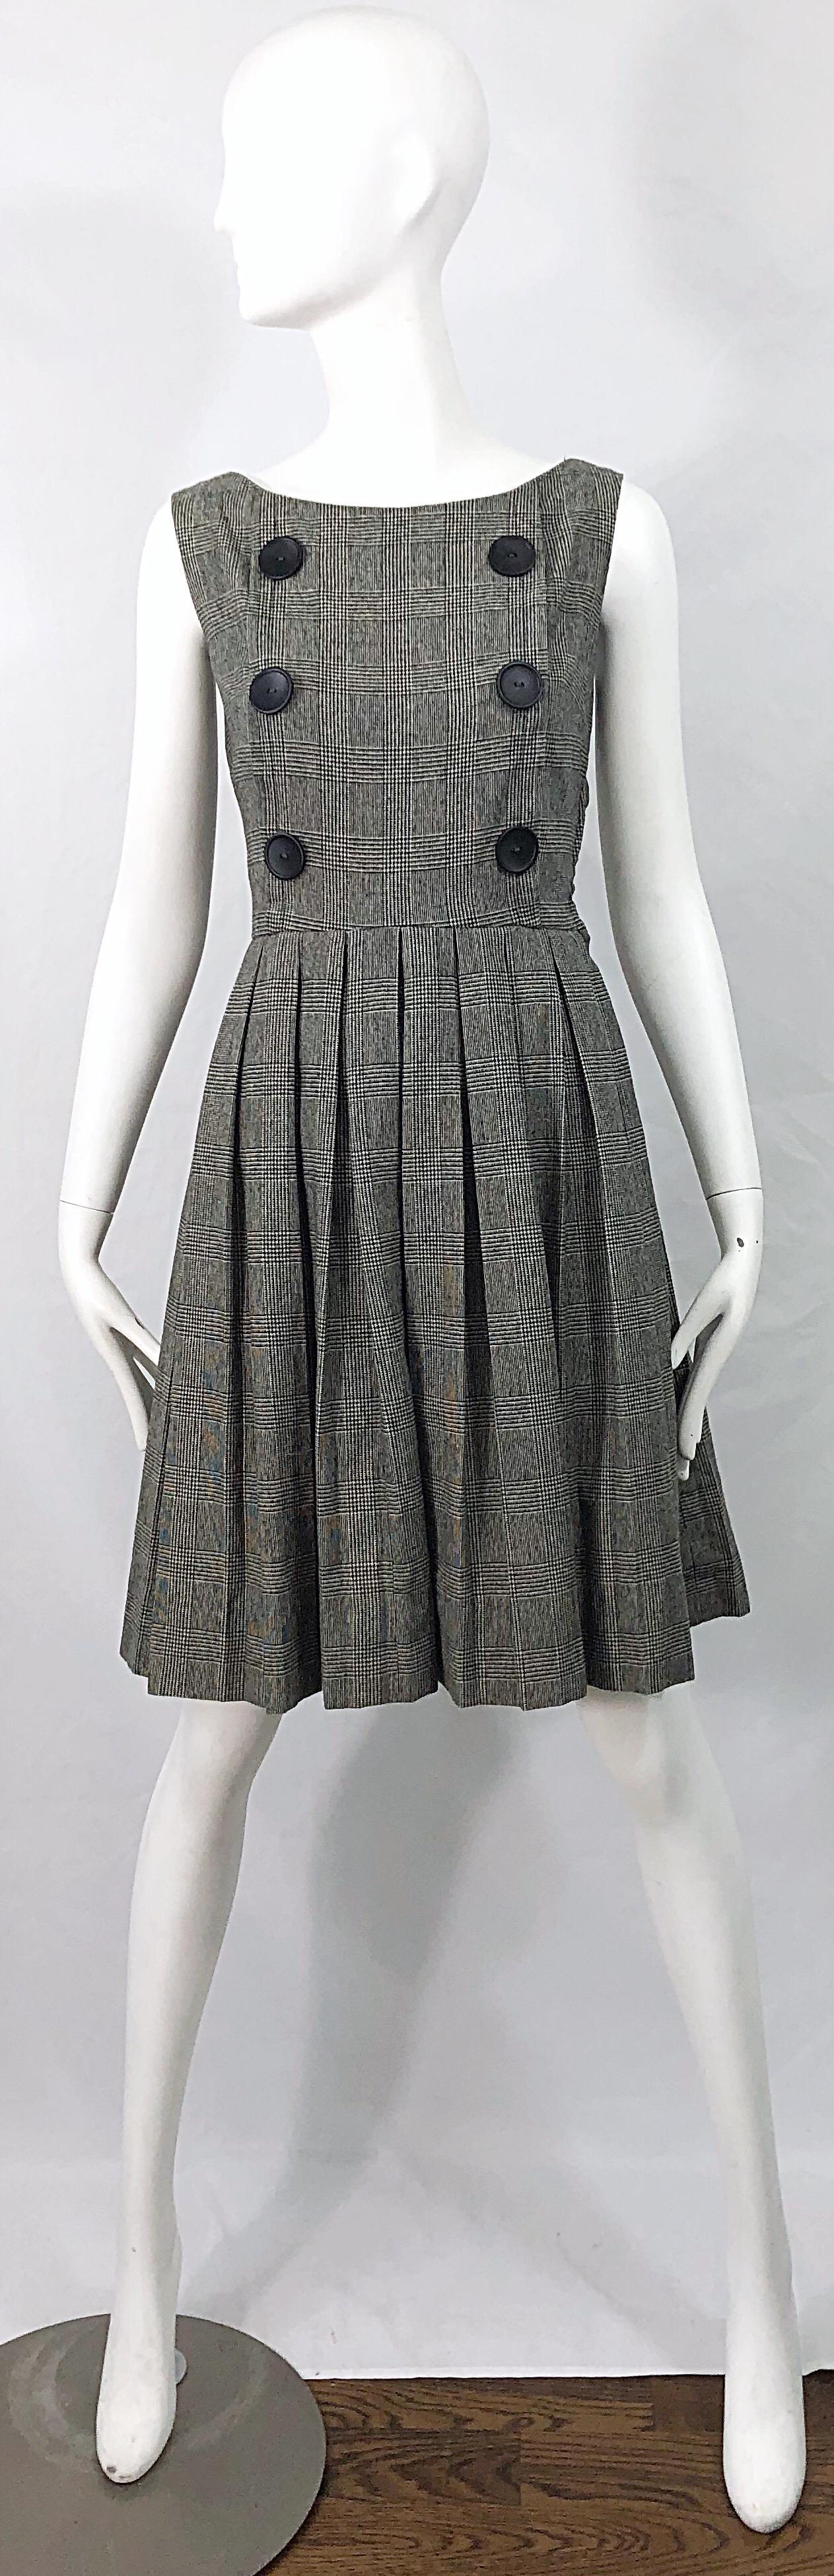 1950s Patty Woodard Black + White Houndstooth Plaid Vintage 50s Fit Flare Dress 8